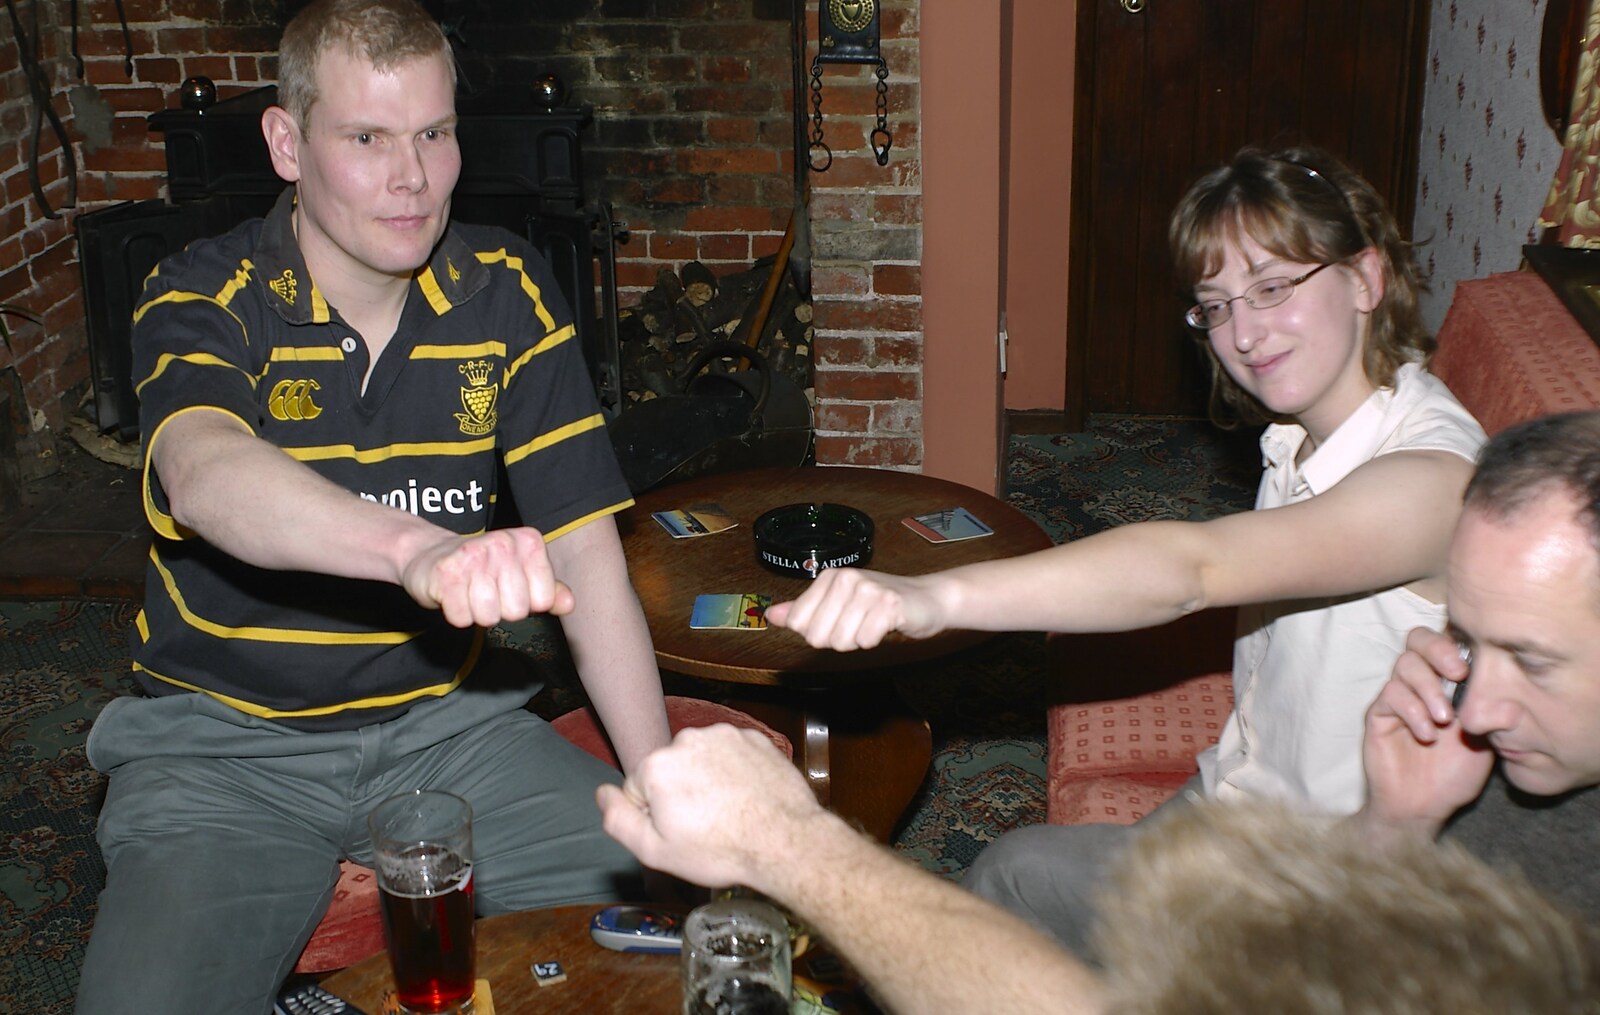 New Year's Eve at the Brome Swan, Brome, Suffolk - 31st December 2004: Some sort of rock/paper/scissors